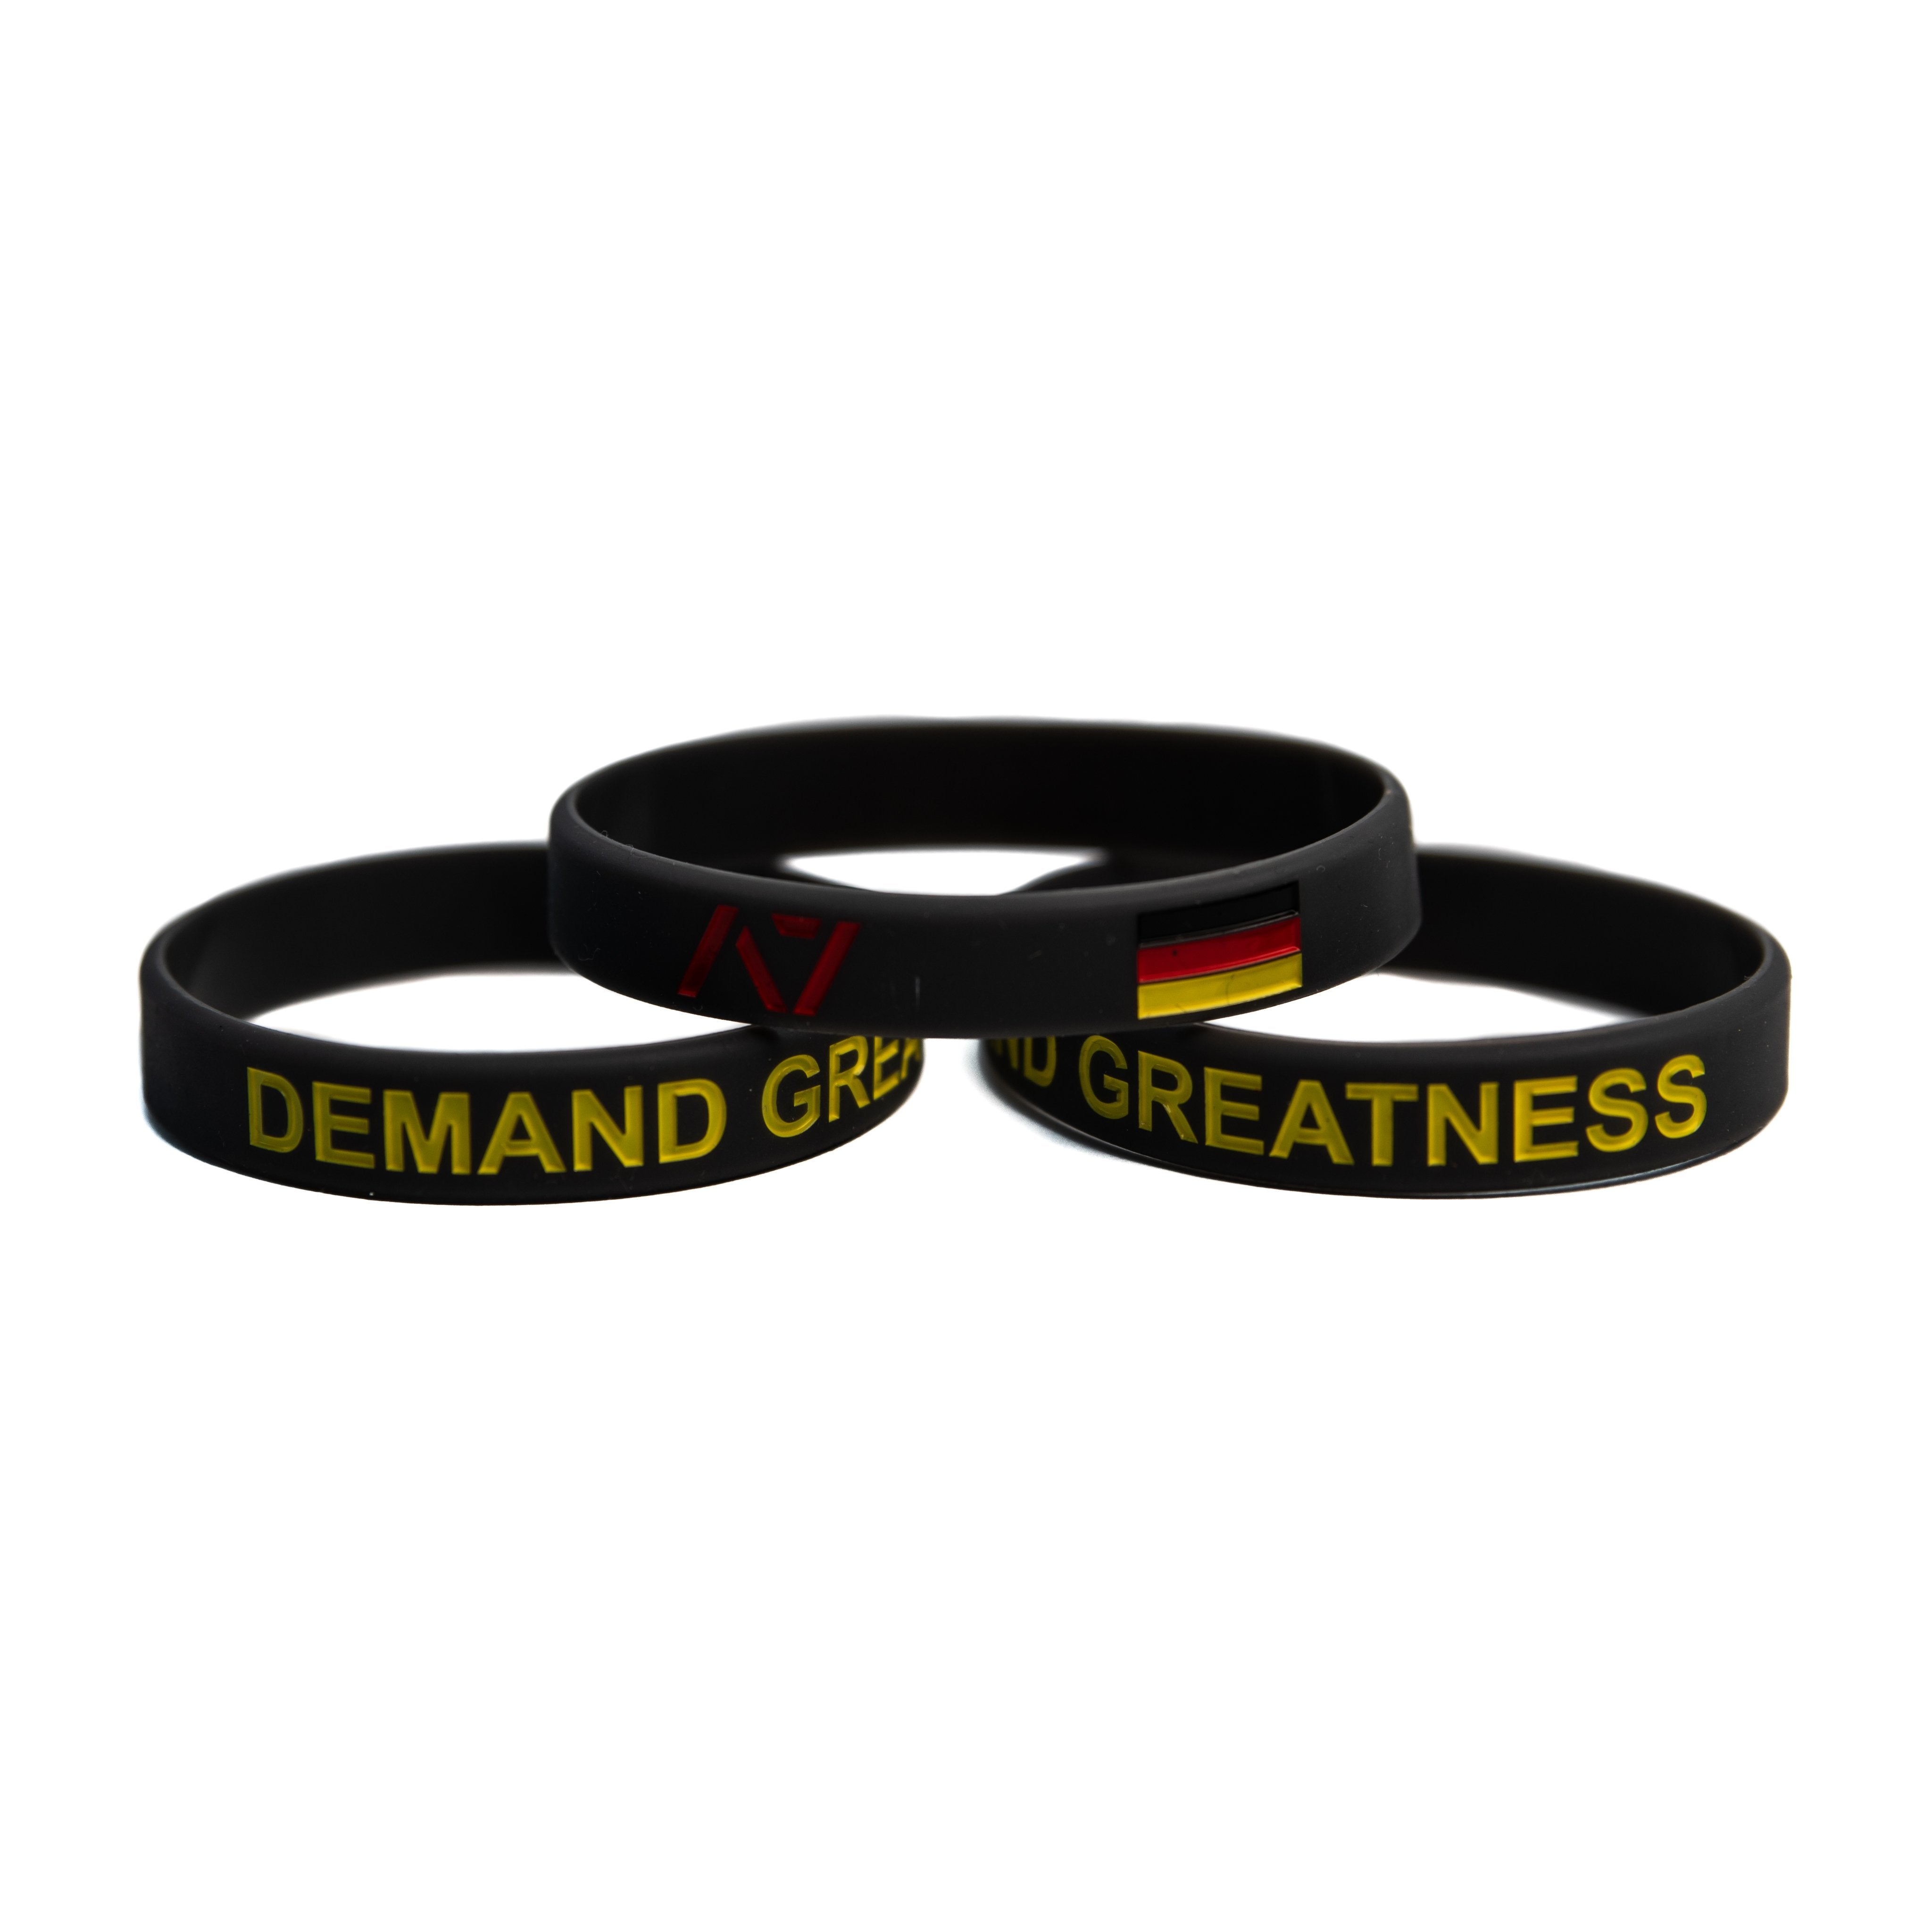 You are always working towards your goals and helping others reach their full potential. Feel the German spirit with this country wristband design that incorporates the German flag into a wristband and reminds you to always Demand Greatness. The wristband is 1/2 inch wide and features black debossed lettering.